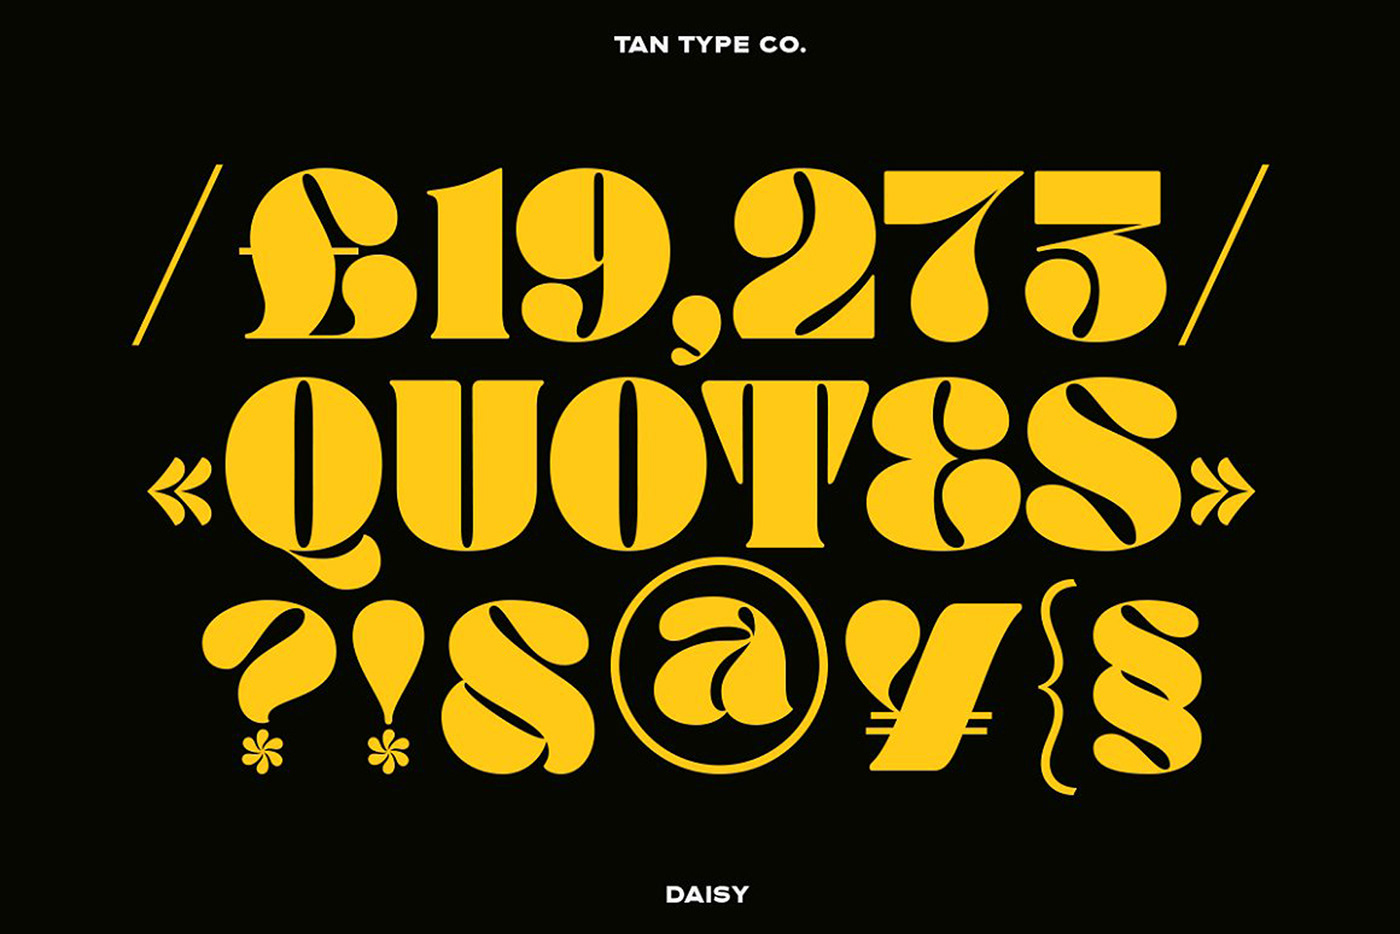 bold classy font Display Fat Serif funky groovy modrn quirky type design Typeface